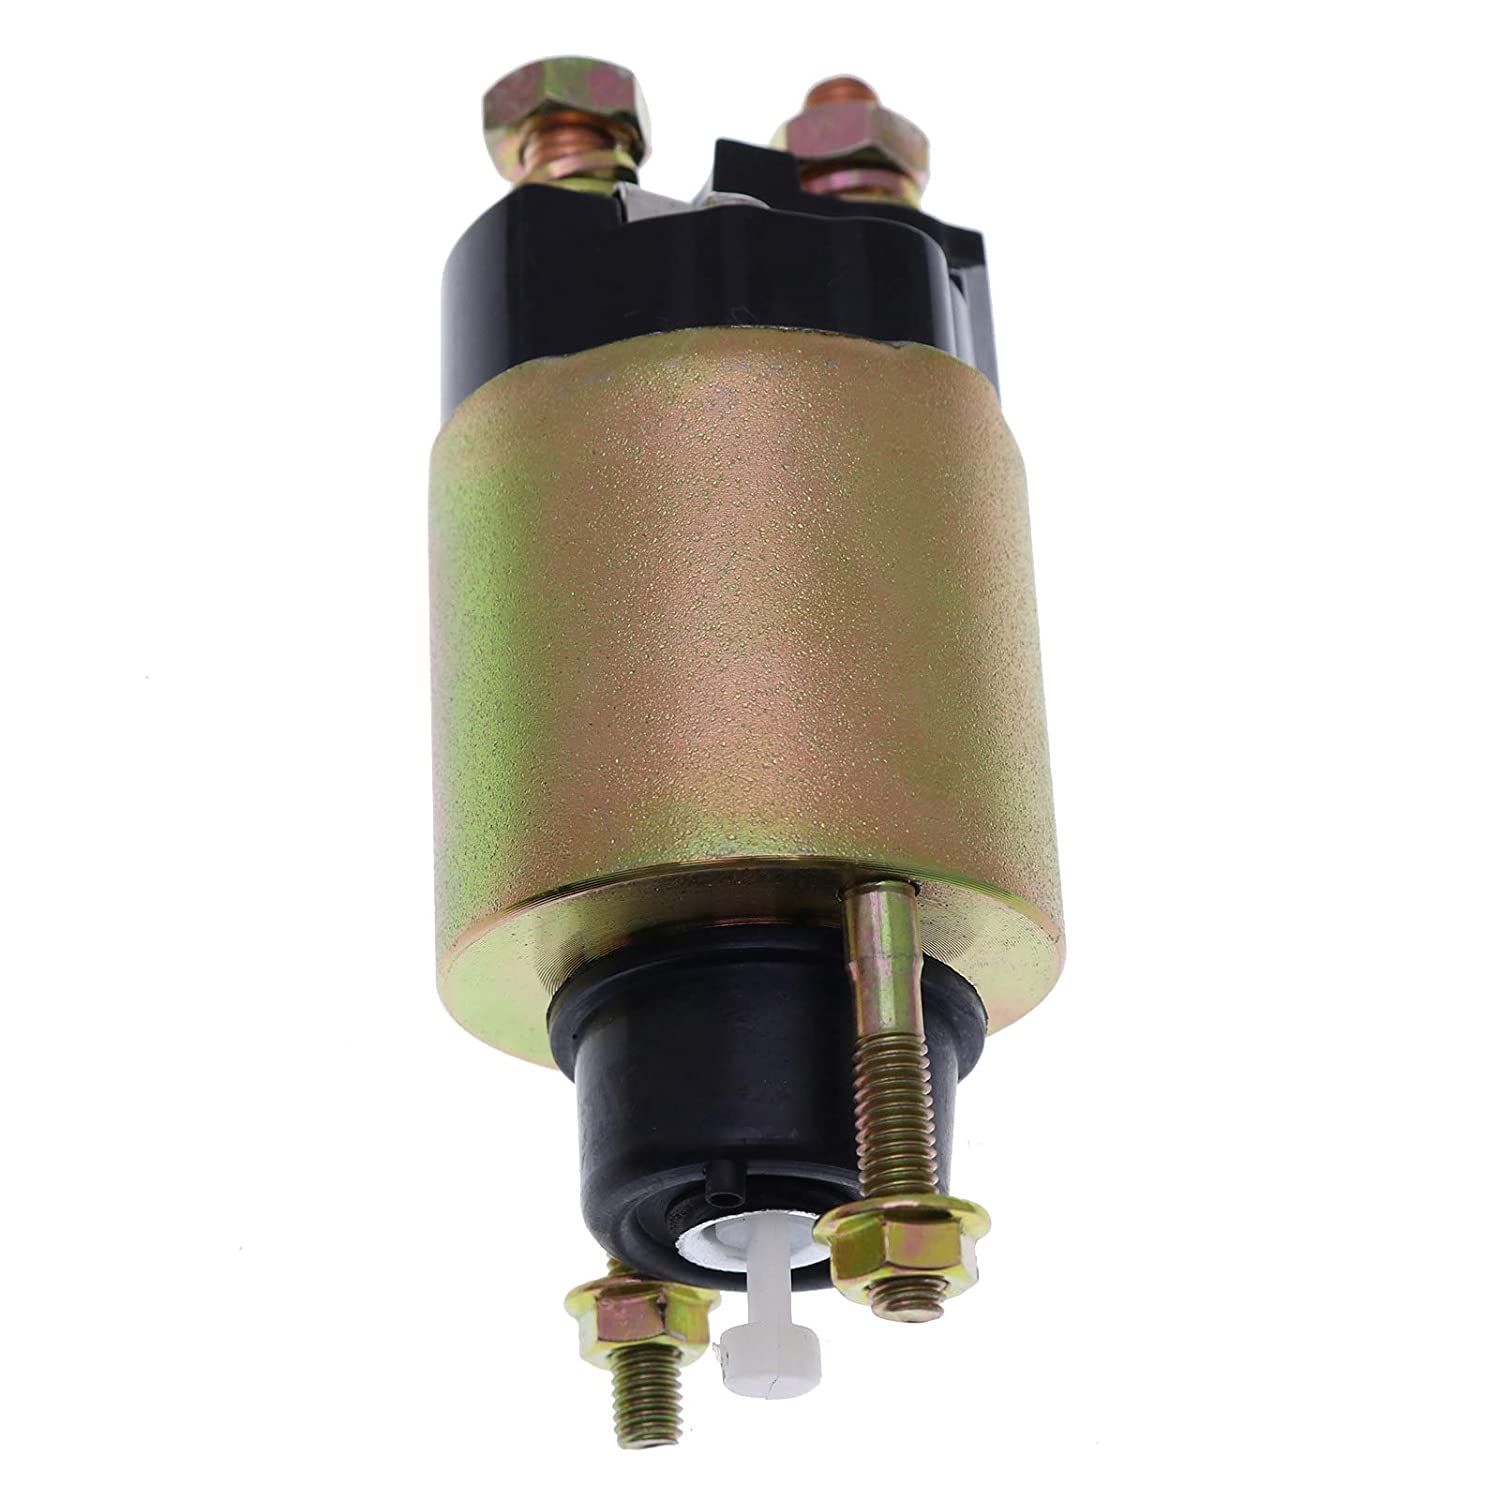 12V 3 Terminals Starter Motor Solenoid Relay Compatible with John Deere Gator AM102577 165 2243 285 325 345 425 GT262 GT265 GT2275 LX176 LX178 LX188 - KUDUPARTS